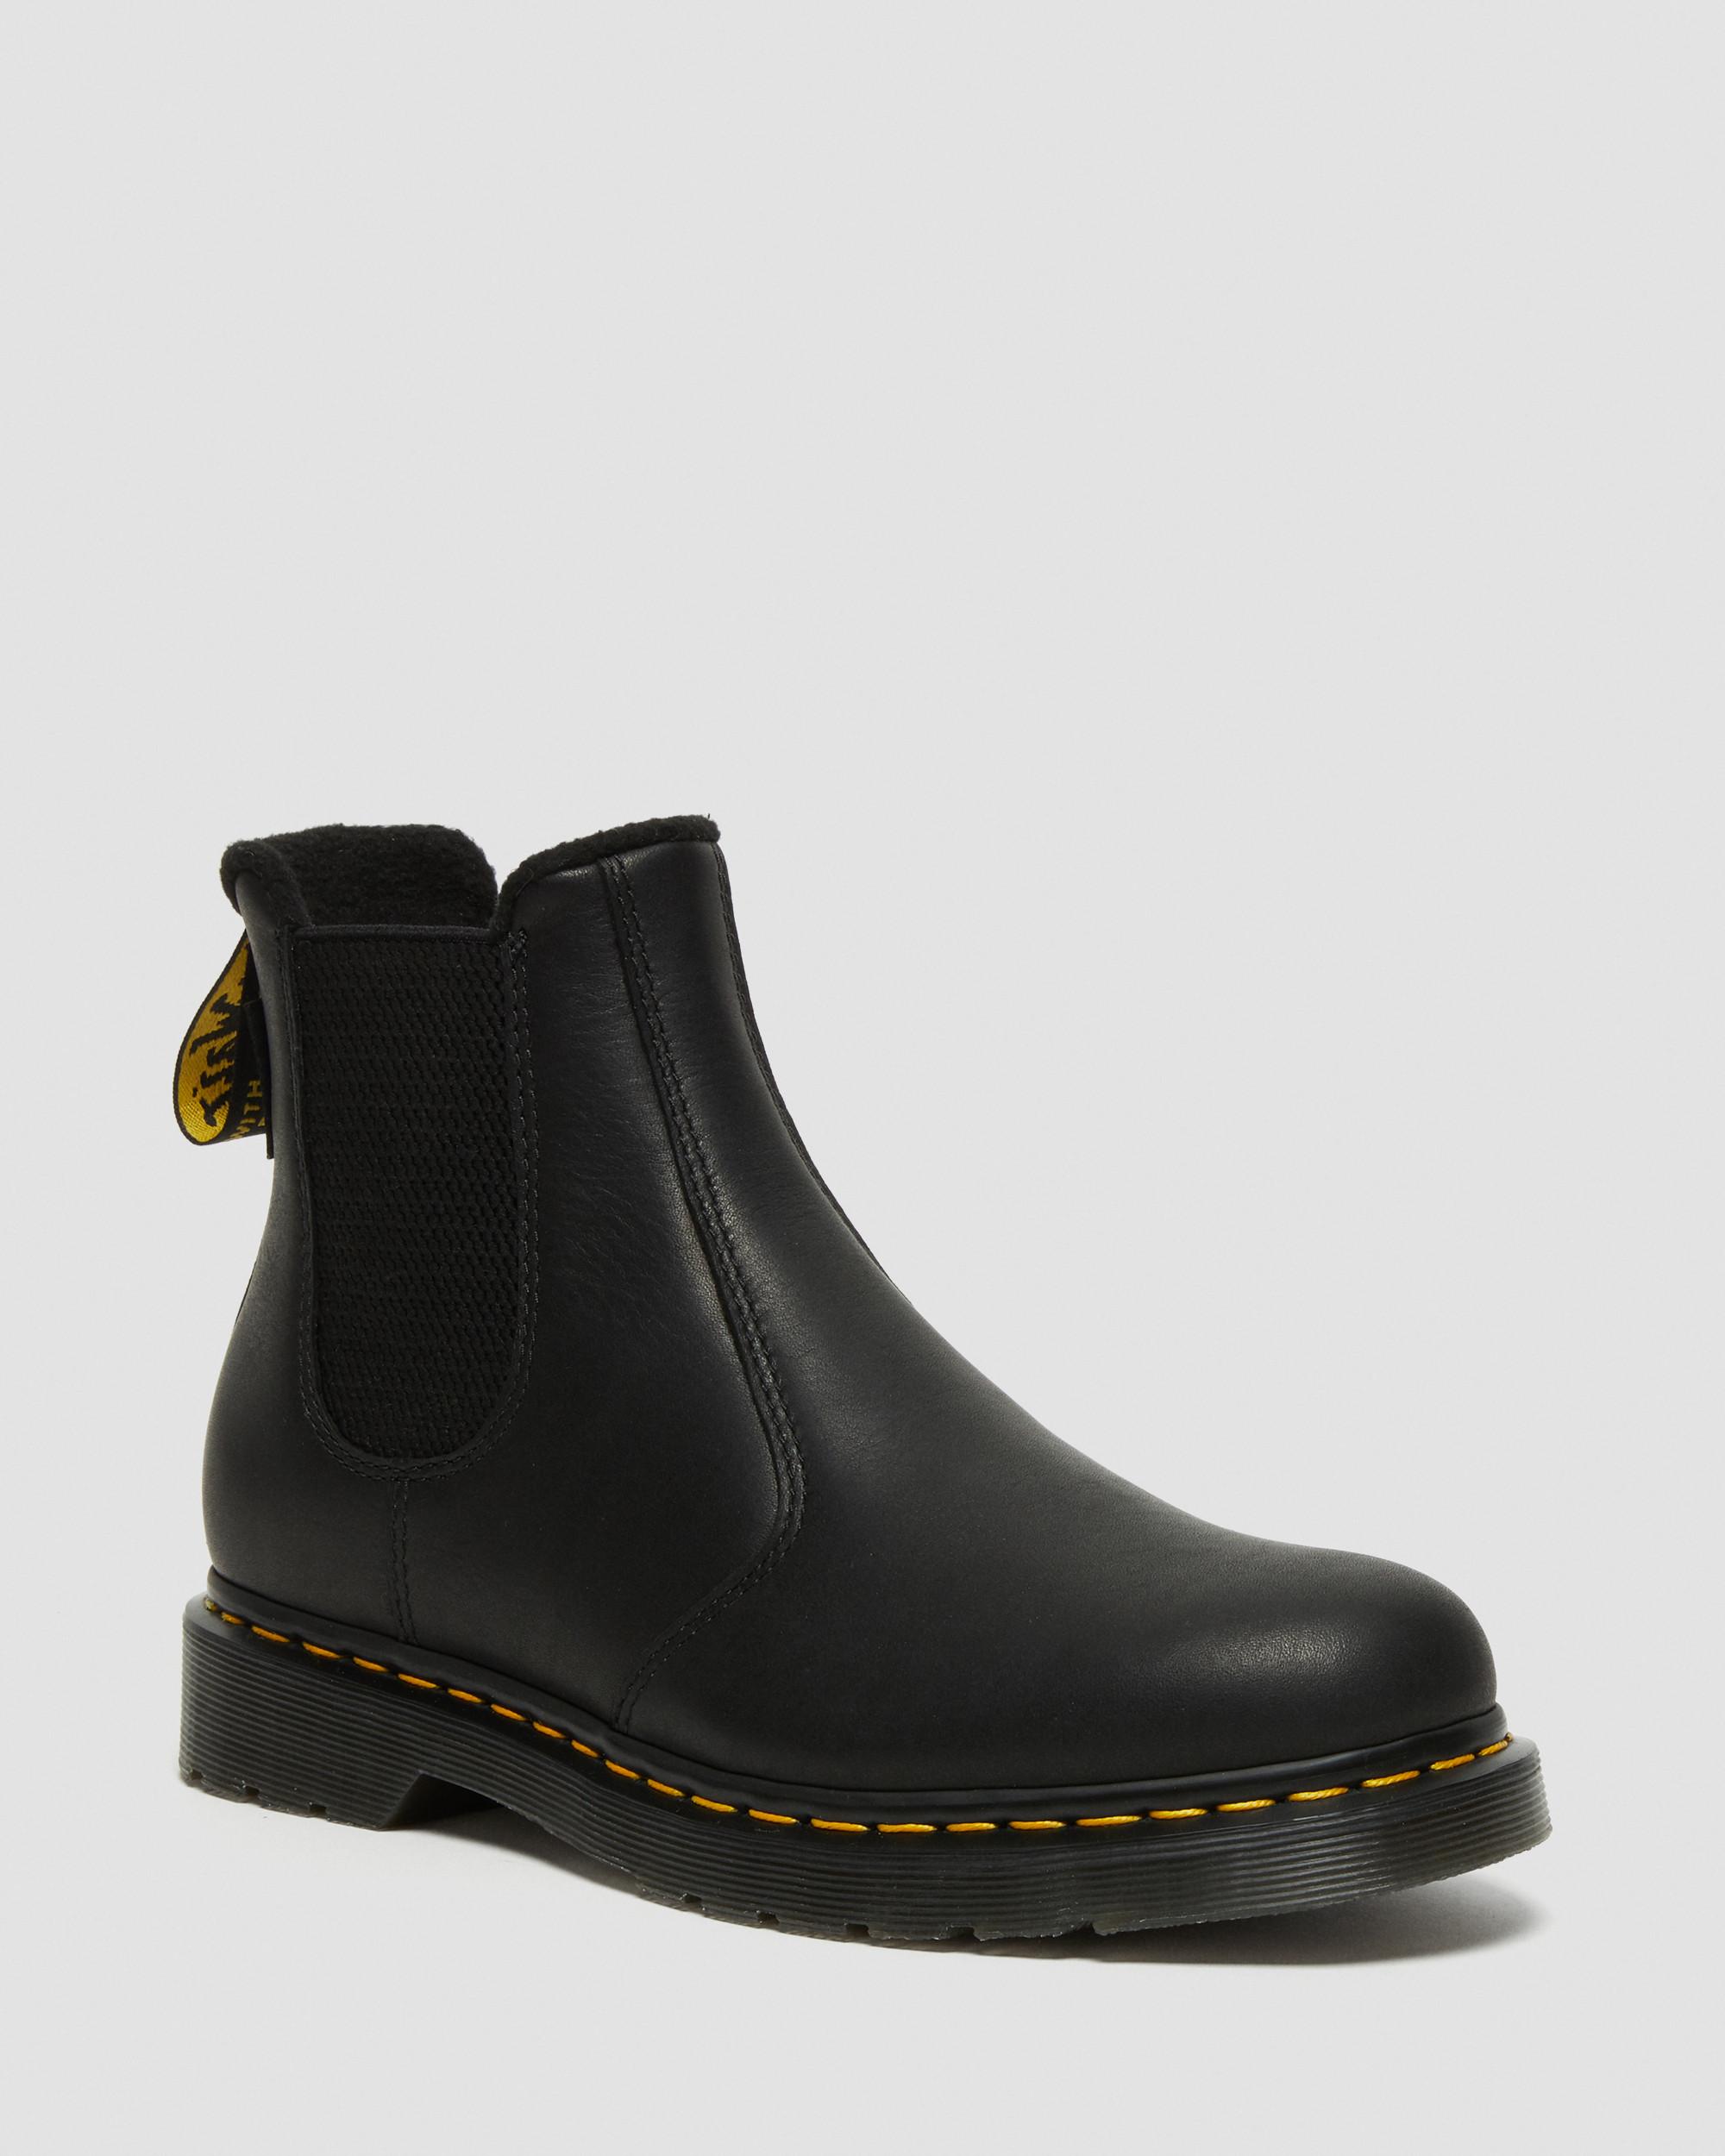 2976 Warmwair Valor Wp Leather Chelsea Boots in Black